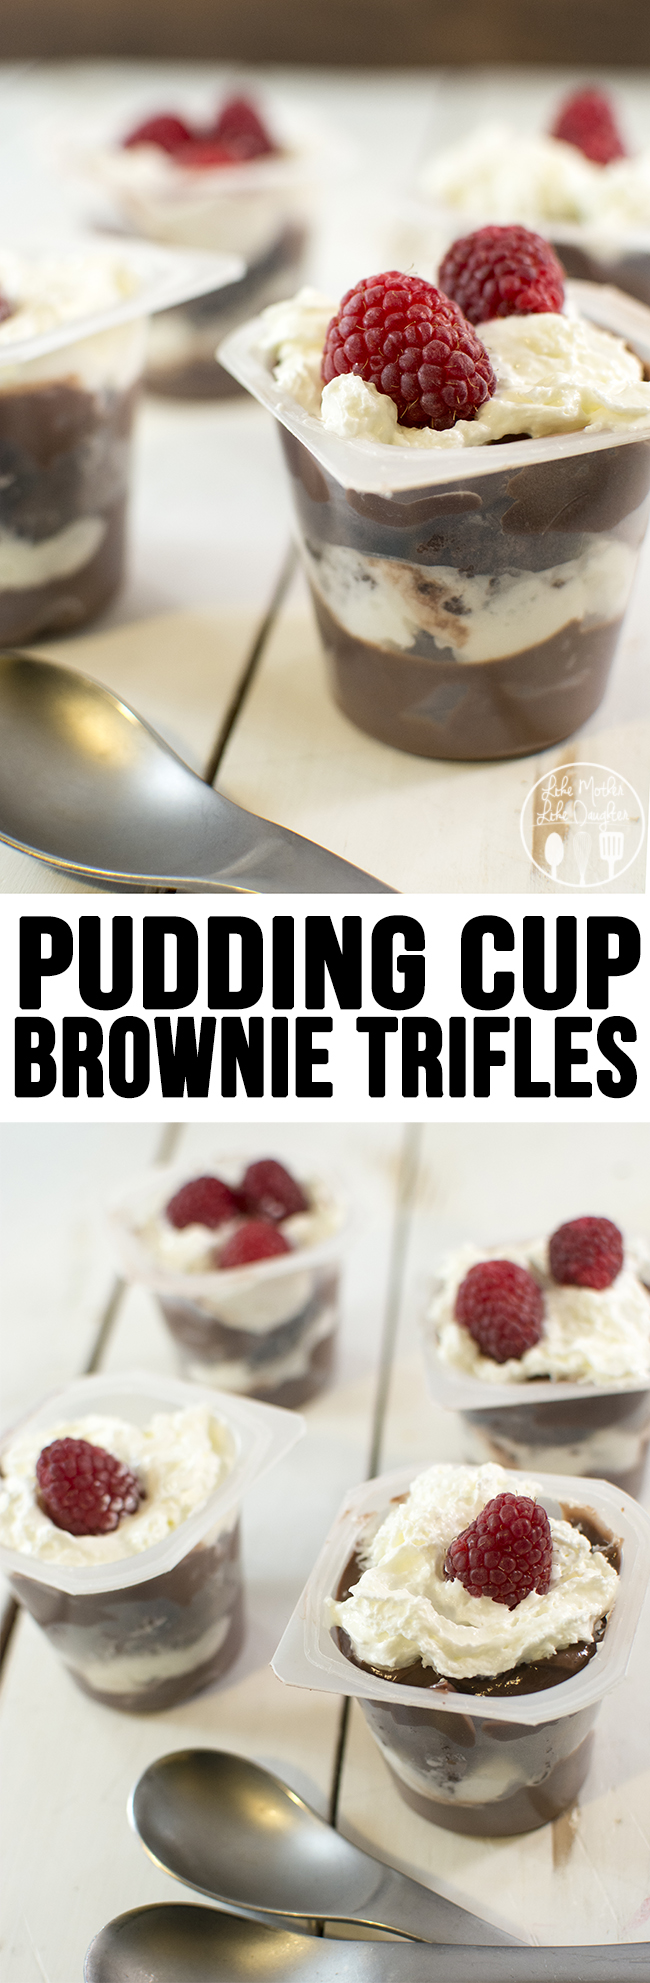 Pudding Cup Brownie Trifles - These simple and delicious pudding cup brownie trifles are a perfect elegant chocolate dessert.